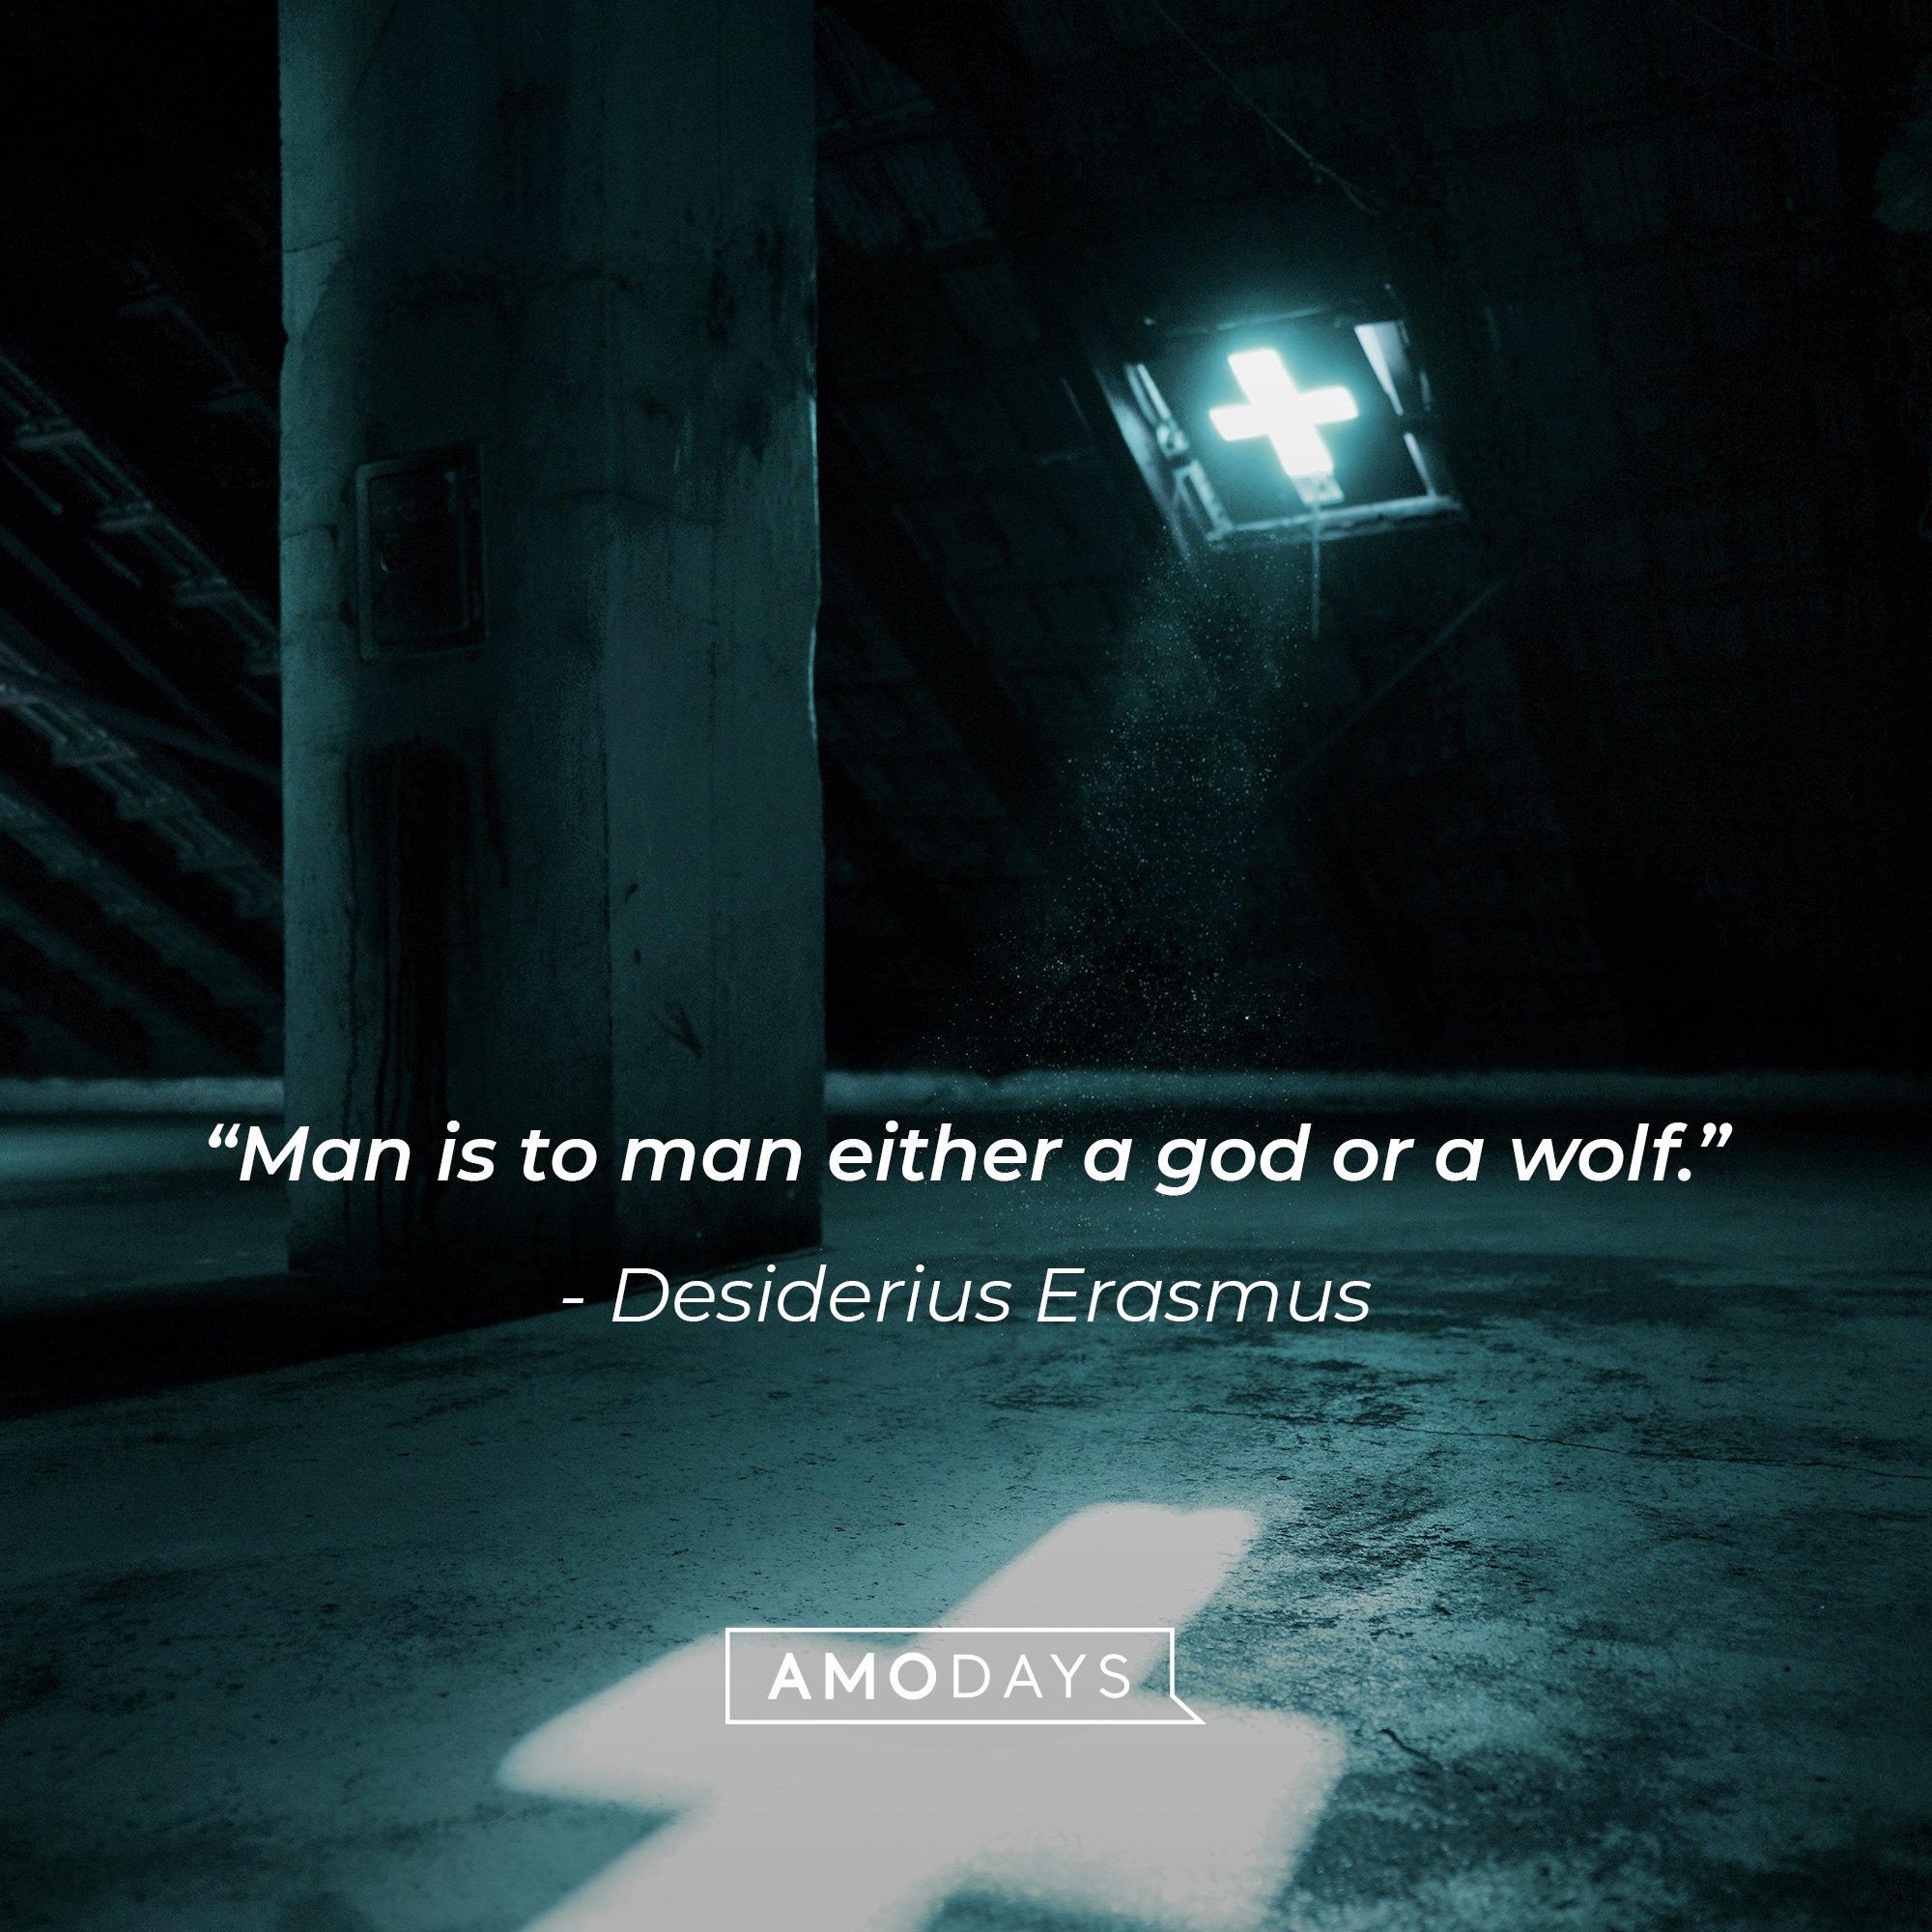  Desiderius Erasmus's quote: “Man is to man either a god or a wolf.” | Image: AmoDays